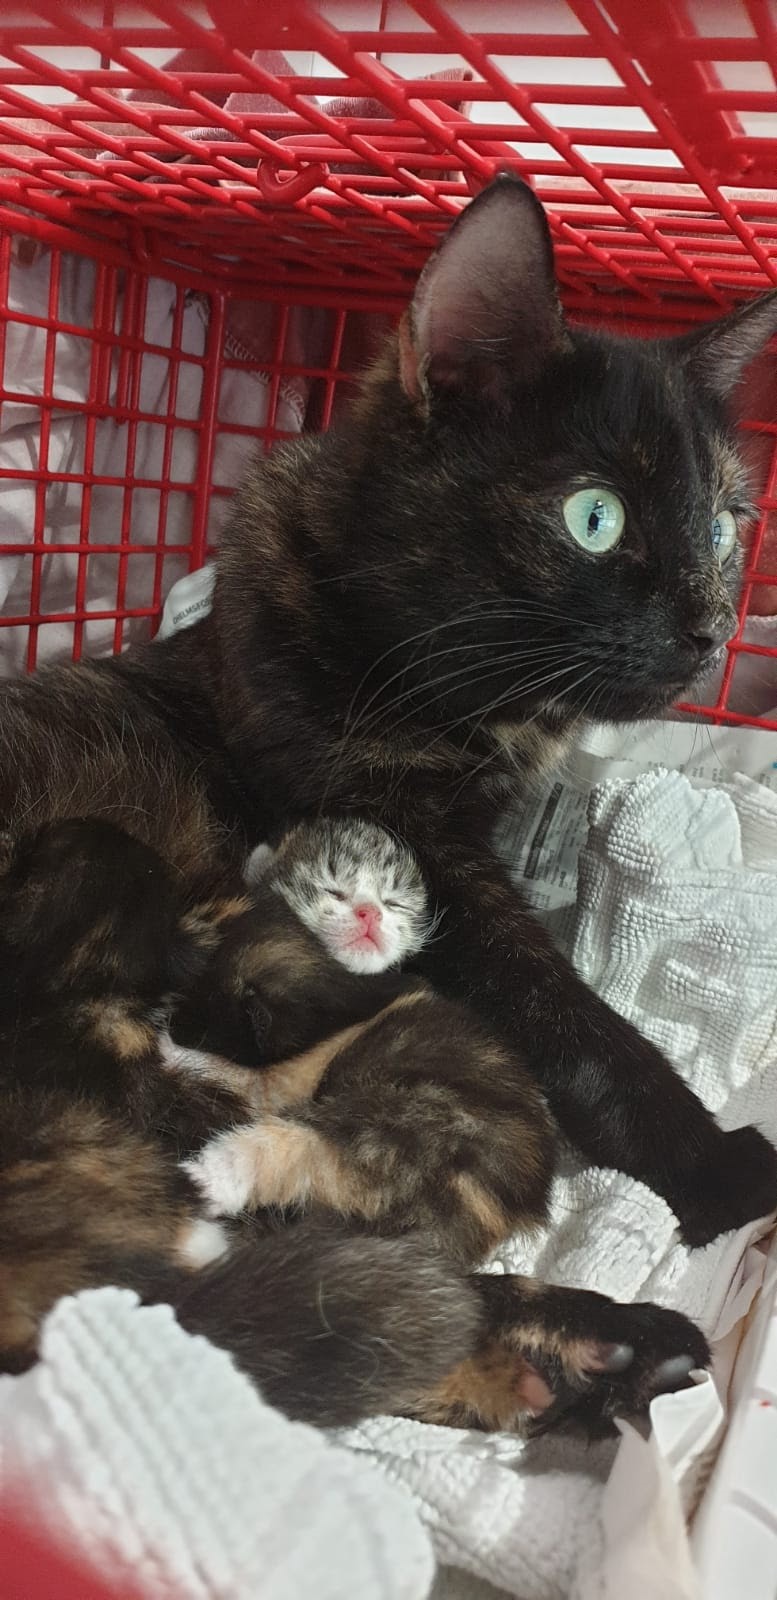 One cat was abandoned while pregnant and has now adopted another abandoned kitten, and taken it into her litter